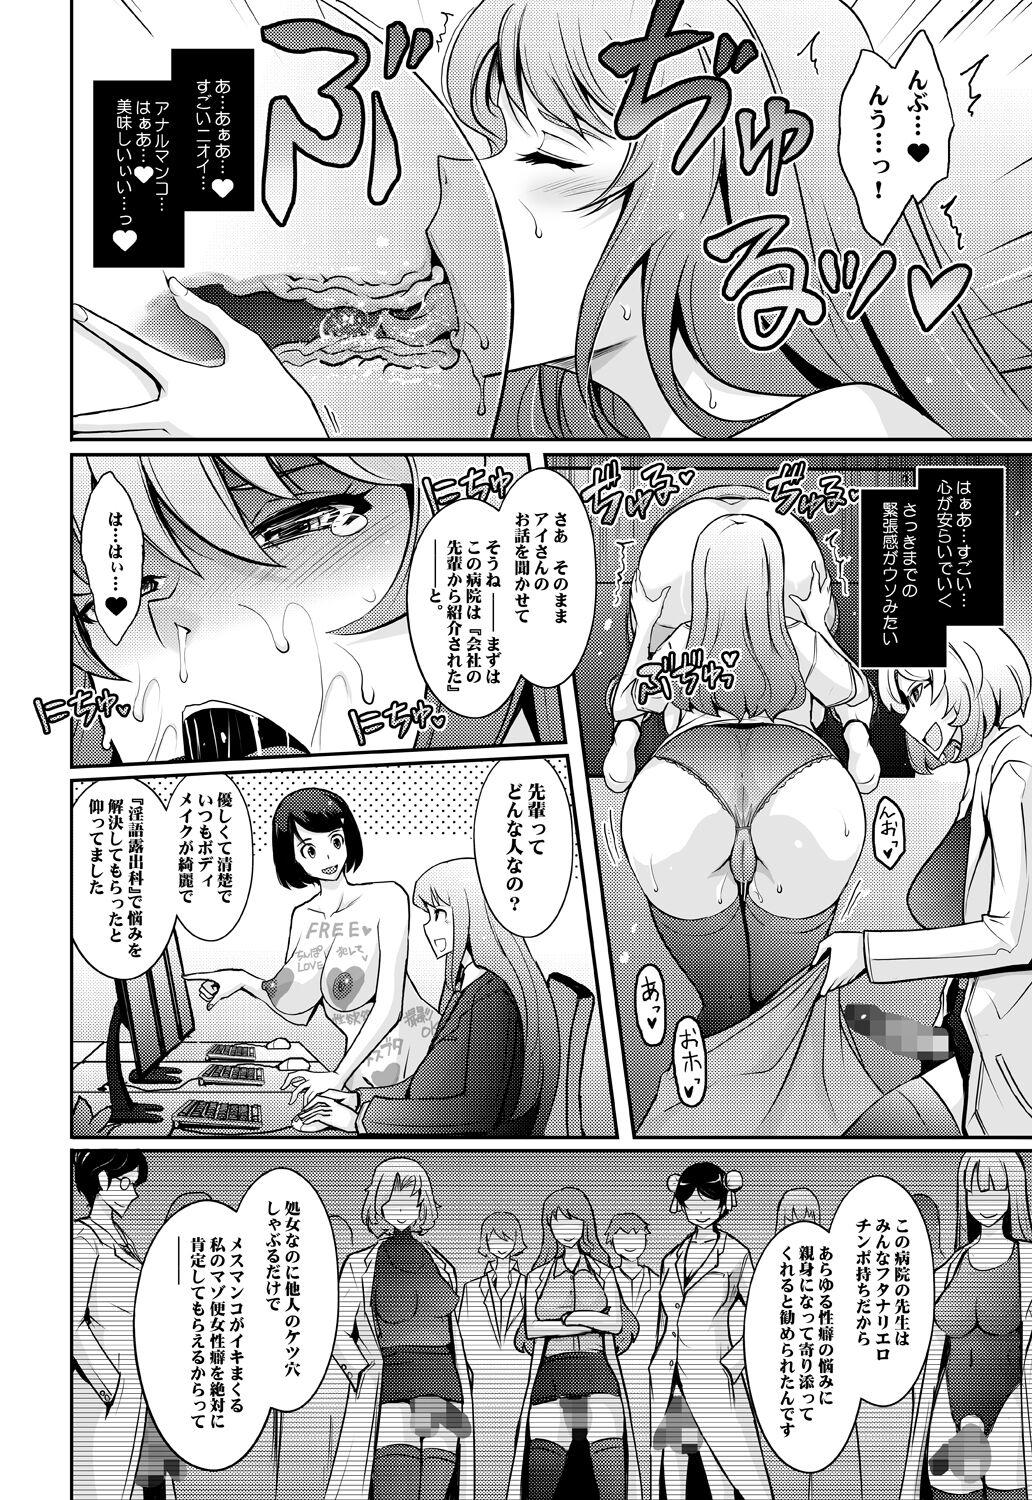 Spying 淫猥性癖全肯定クリニック 肛穴口淫科 - Original Transexual - Page 10